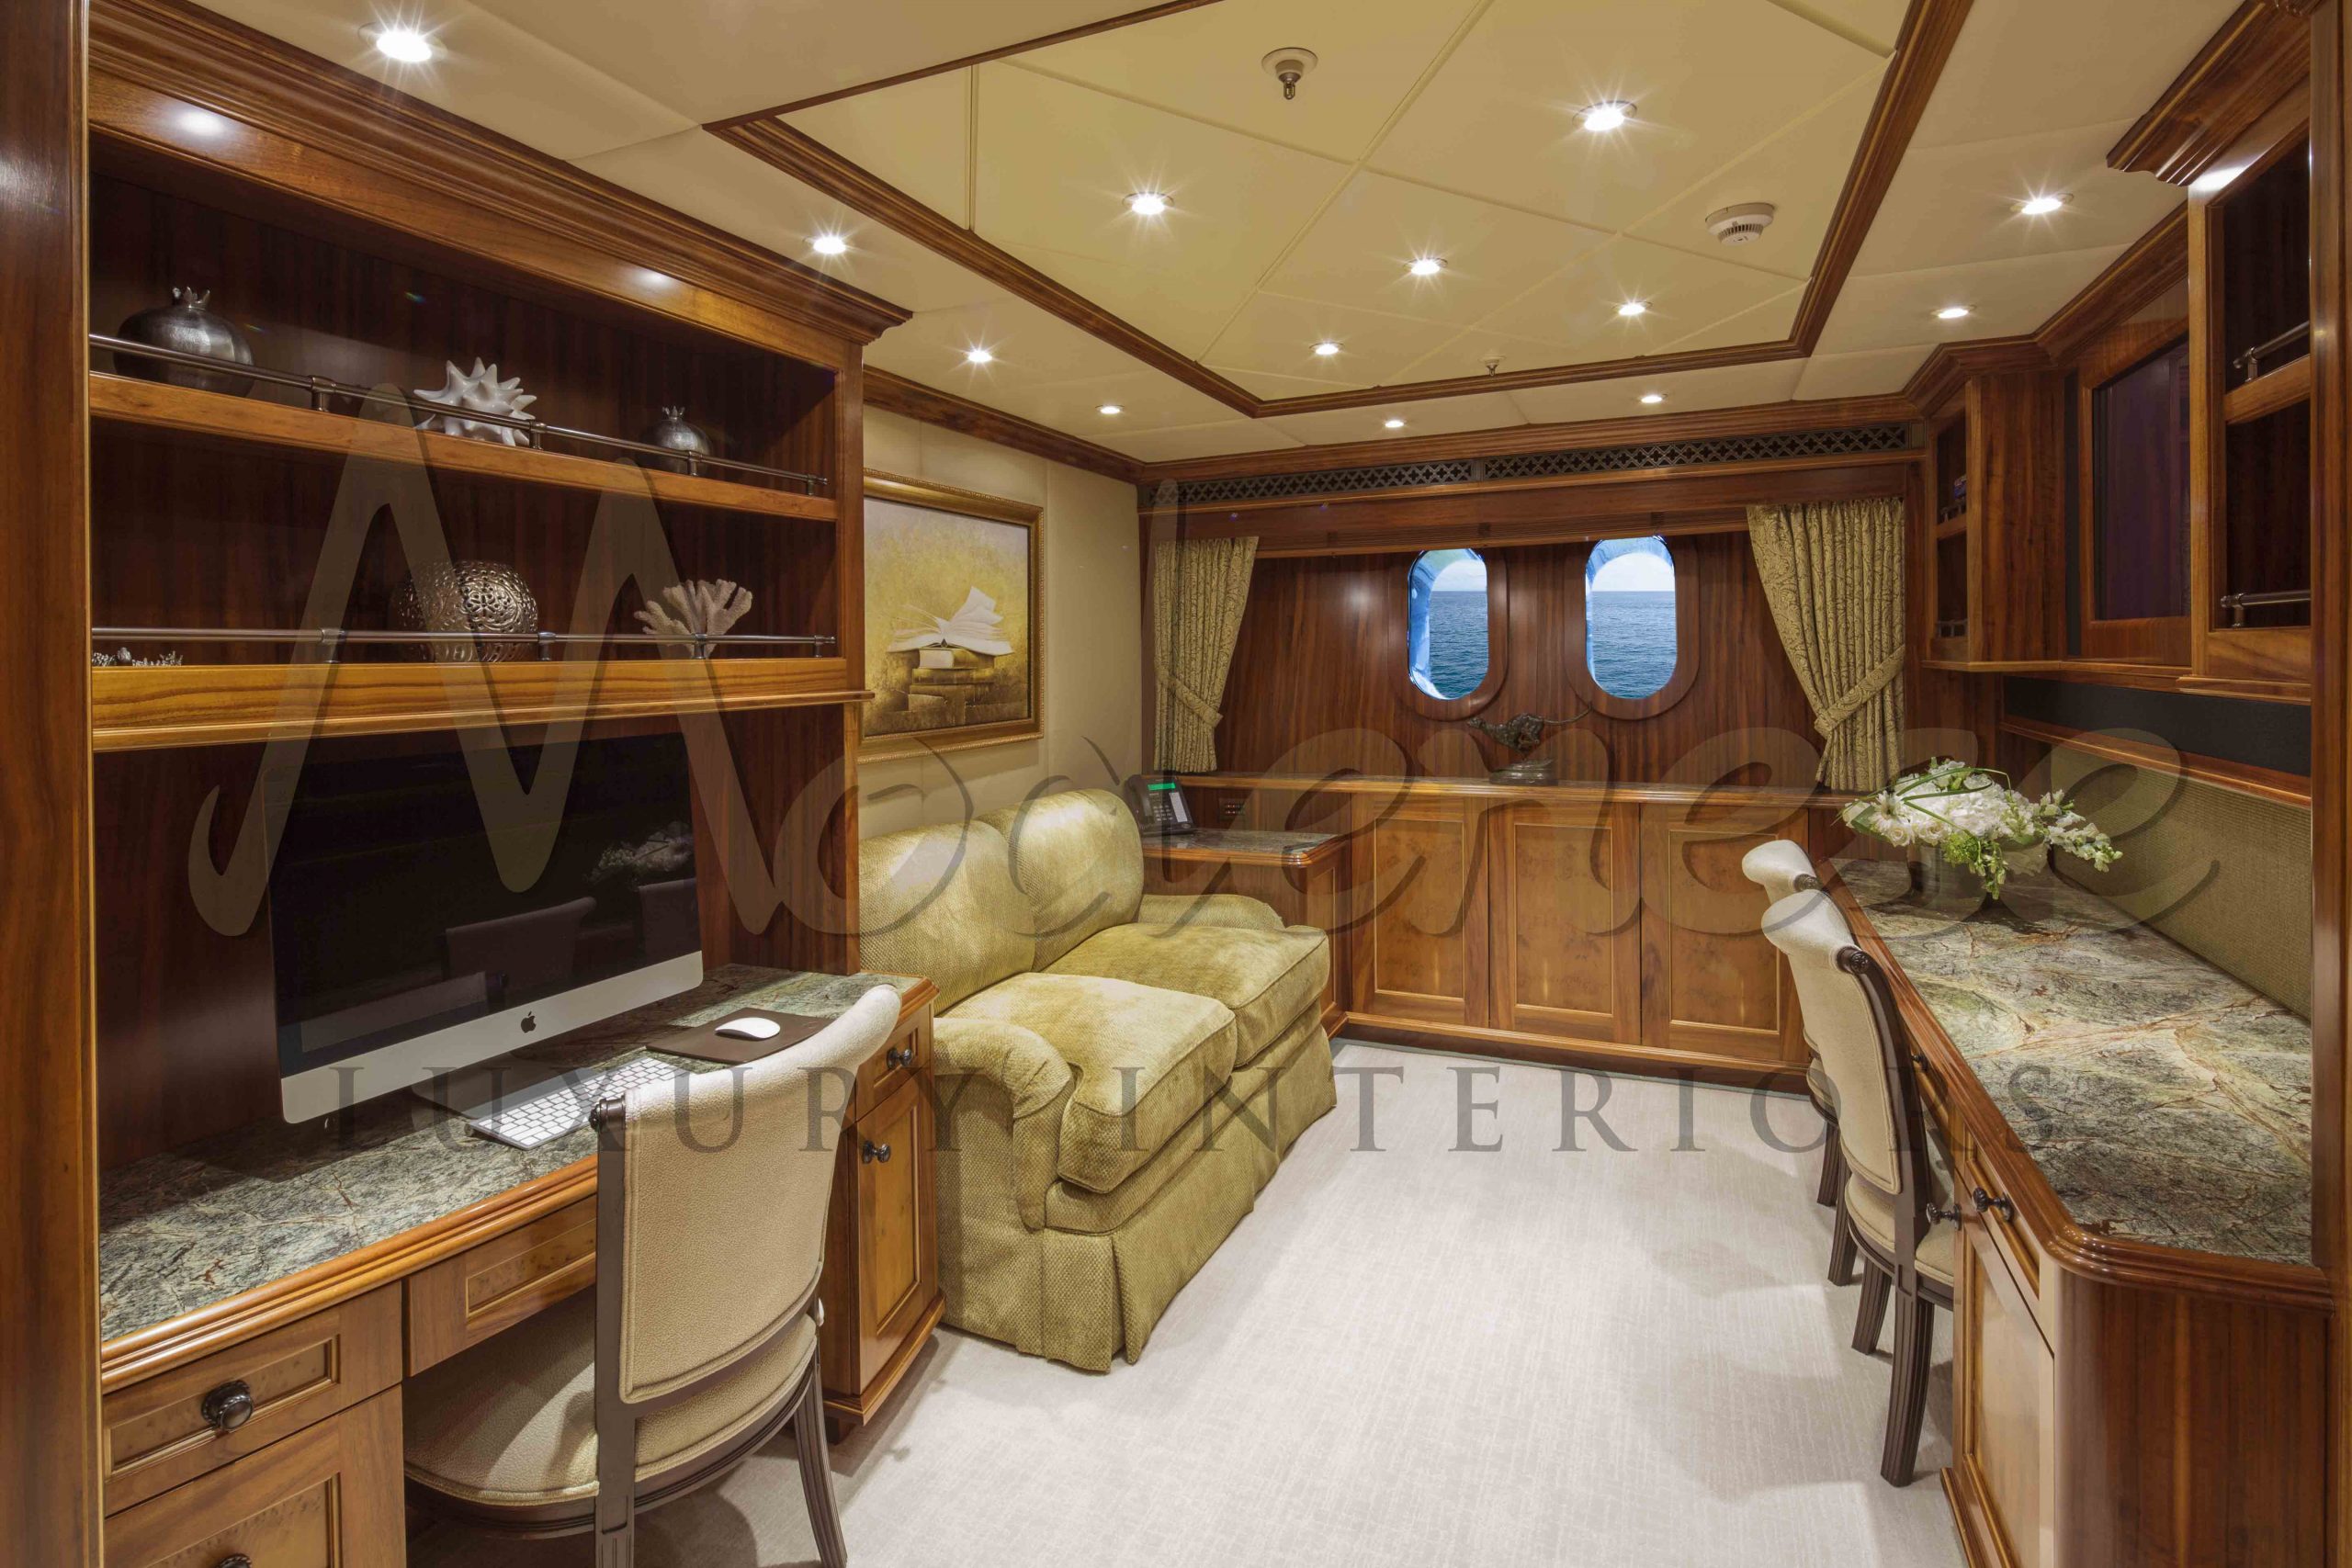 Refined style, exclusive design of yachts. Italian craftsmanship, top quality interiors. Best interior design service in Bahrain.